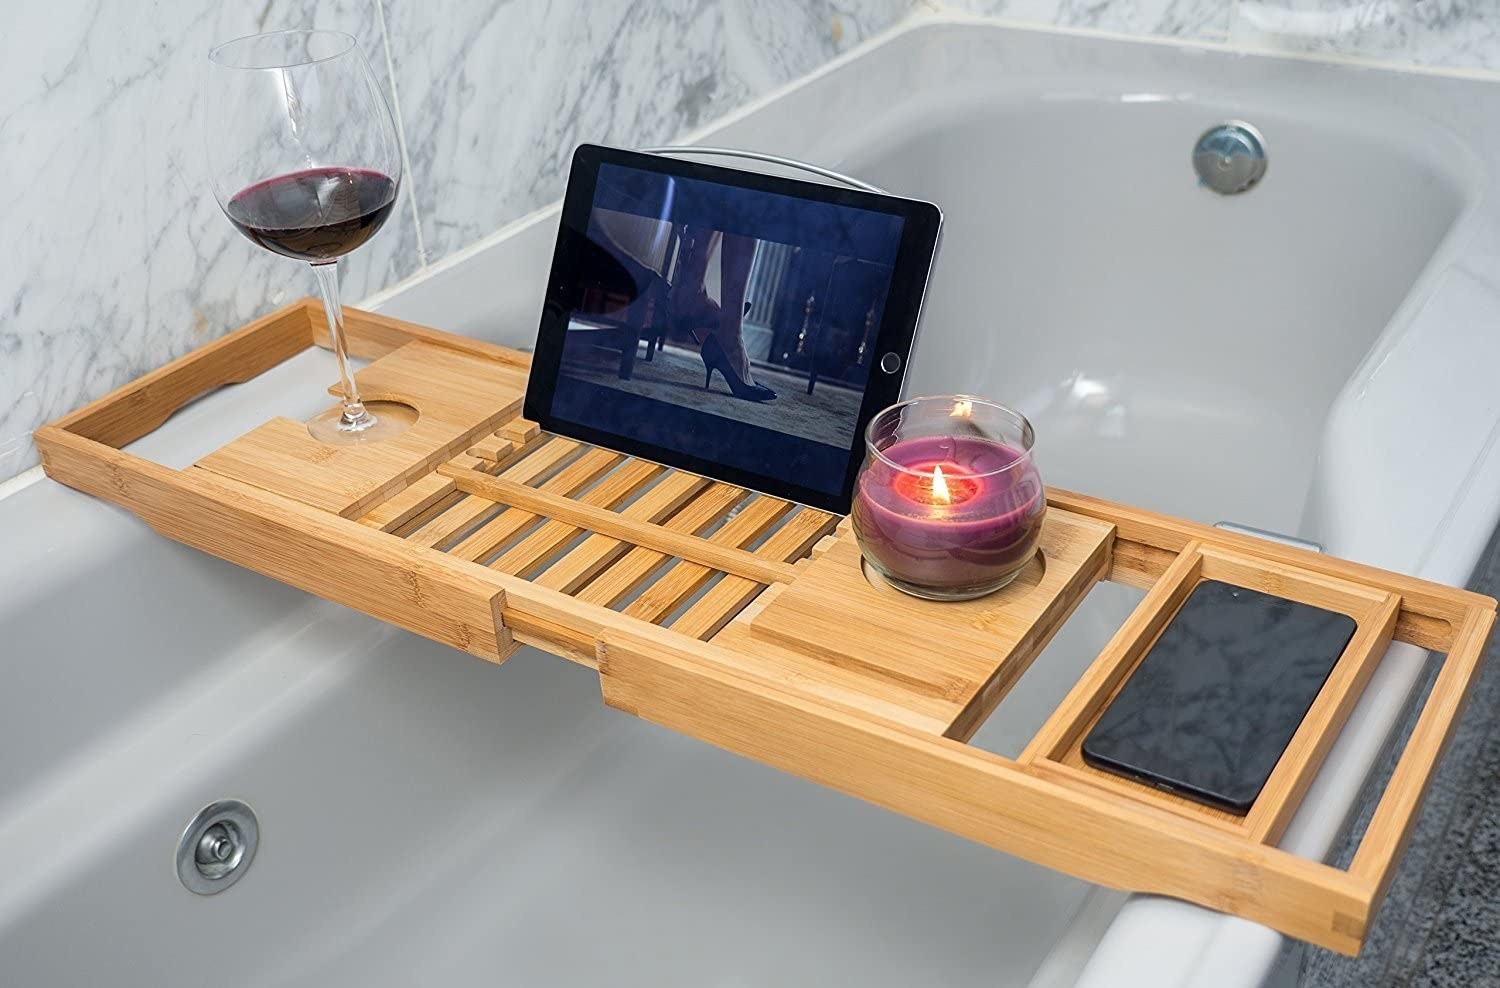 an extendable bamboo bath tray holding a tablet, wine glass, and candle